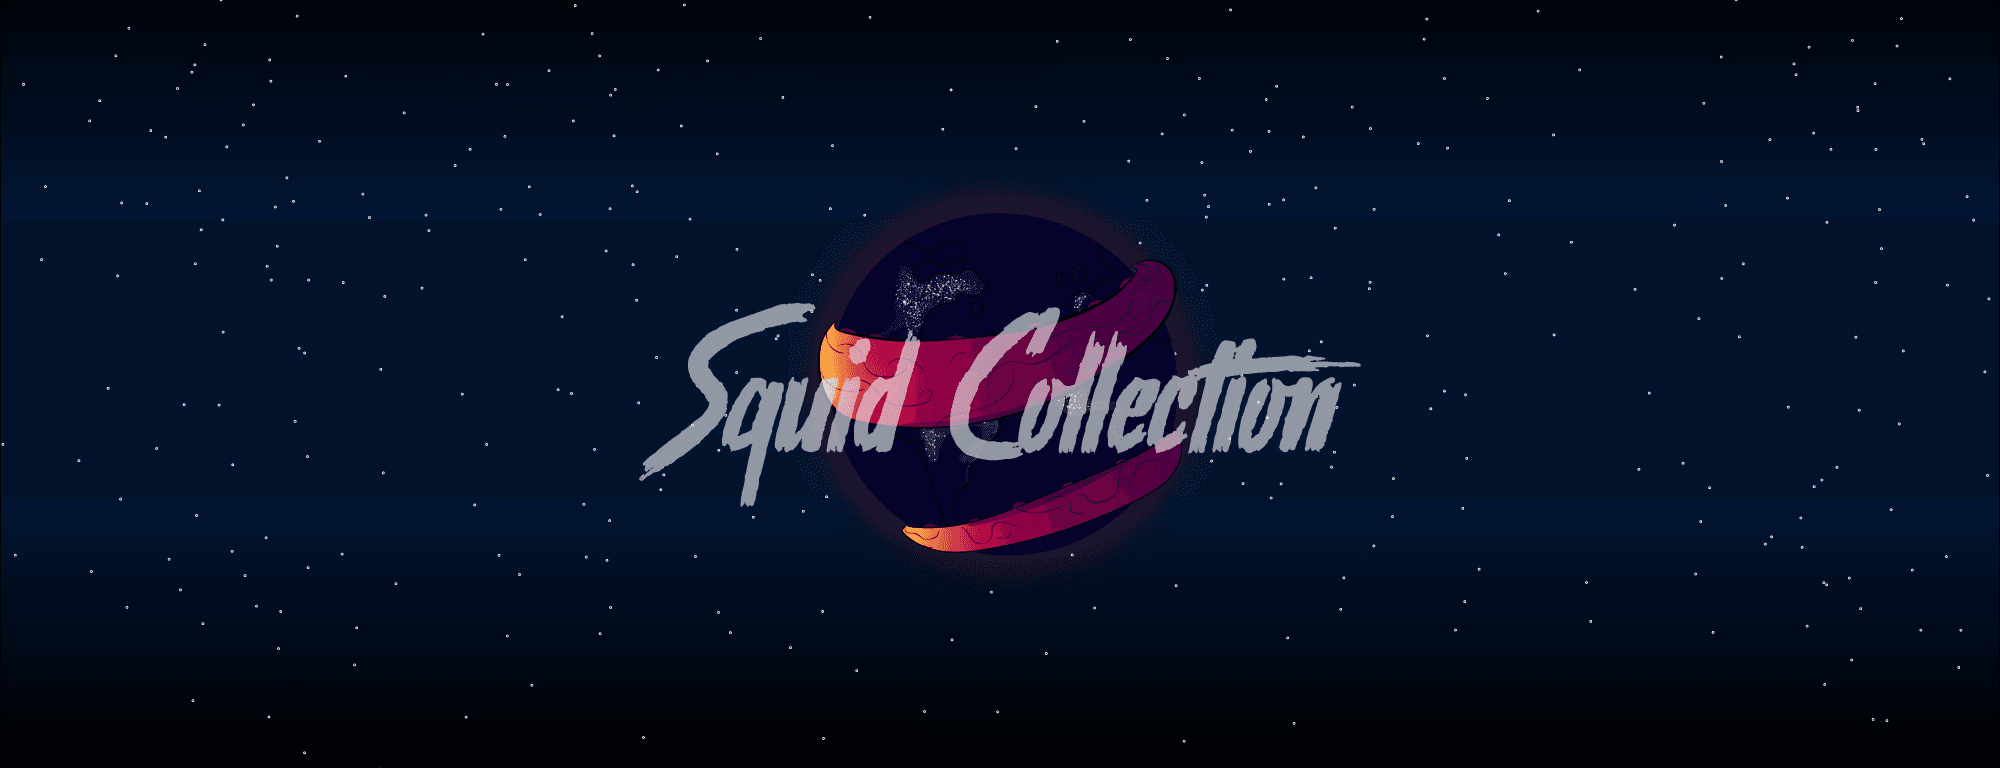 TheSquidCollection 横幅